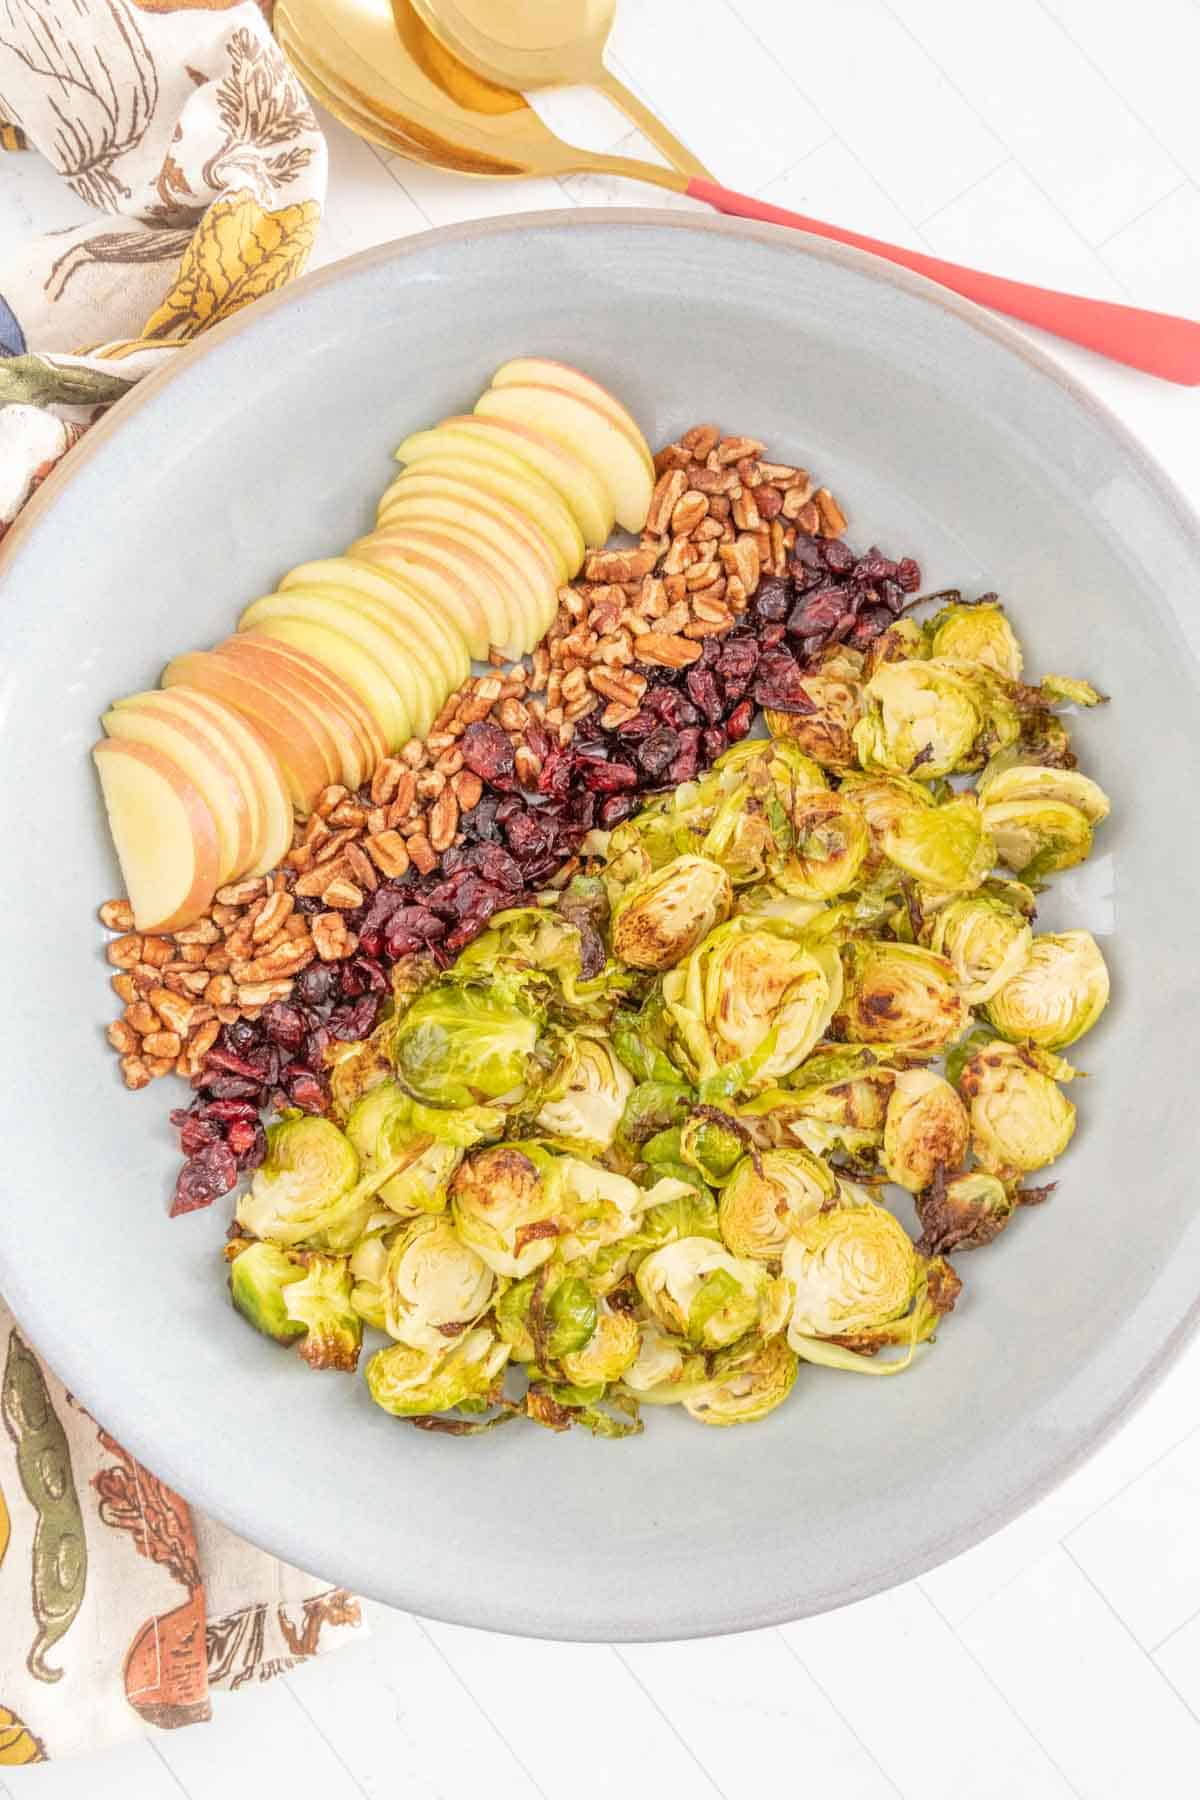 A bowl of brussels sprouts, apples and nuts.